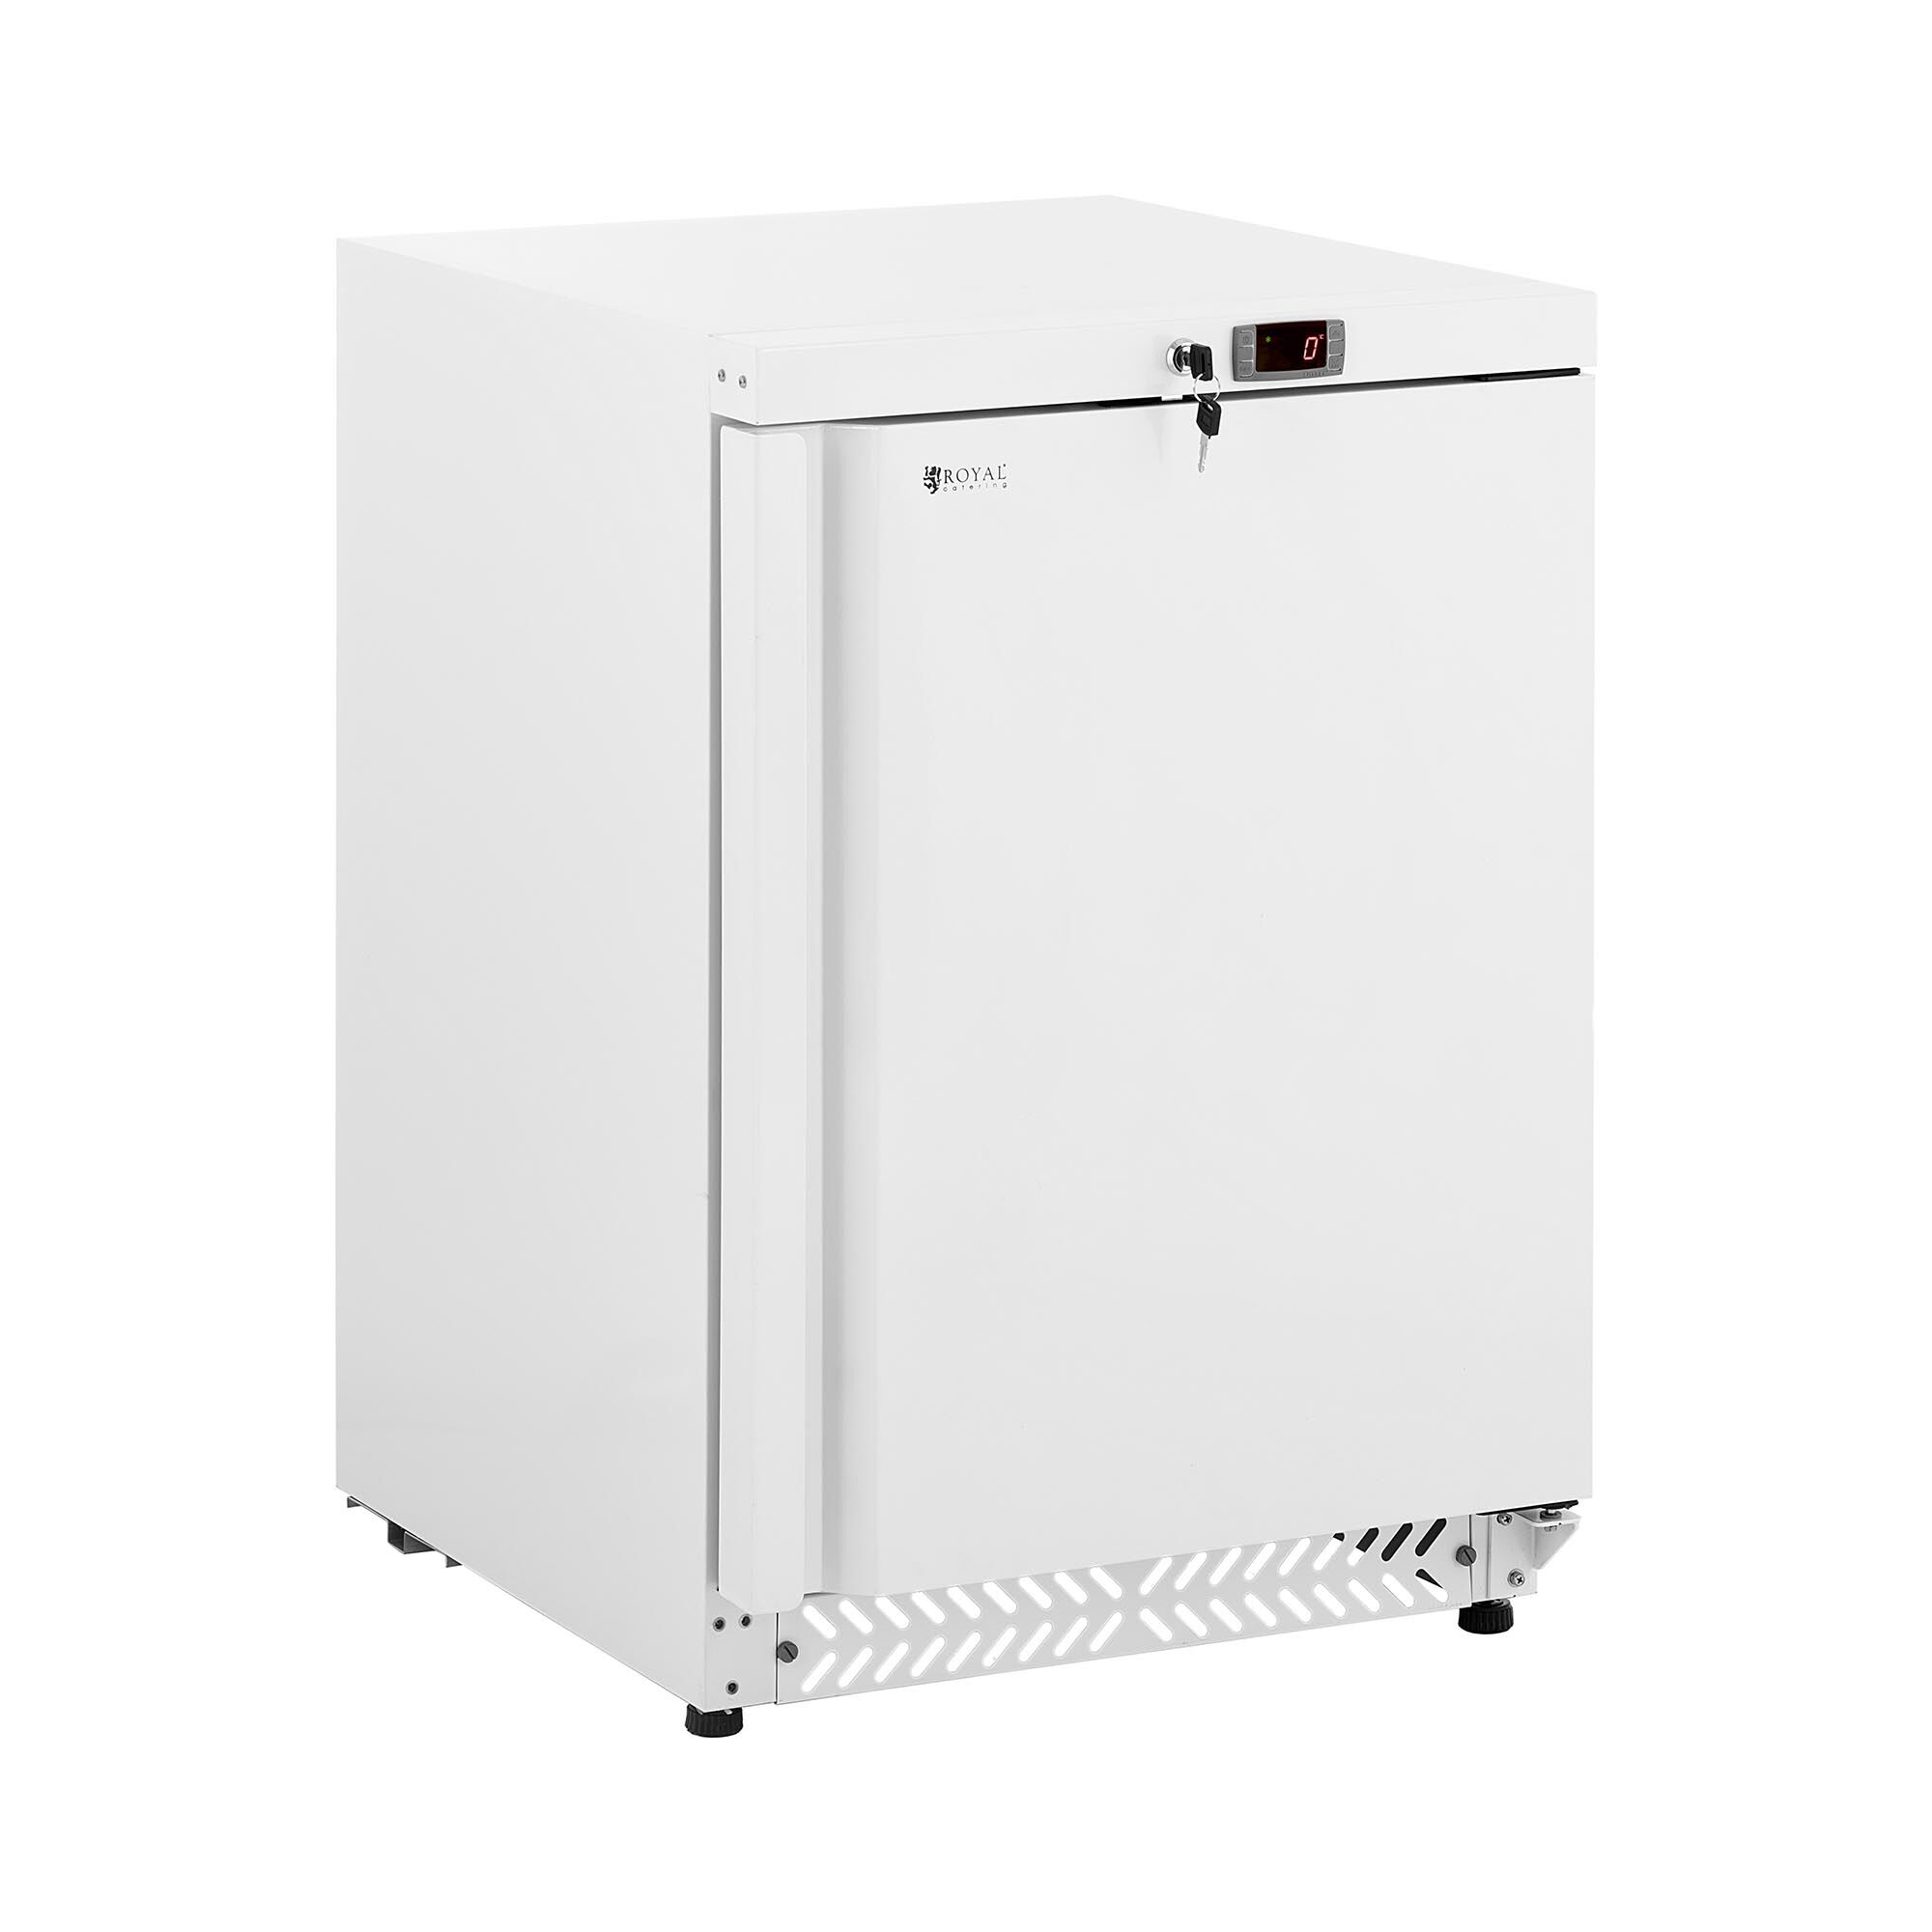 Royal Catering Refrigerator - 170 L - Royal Catering